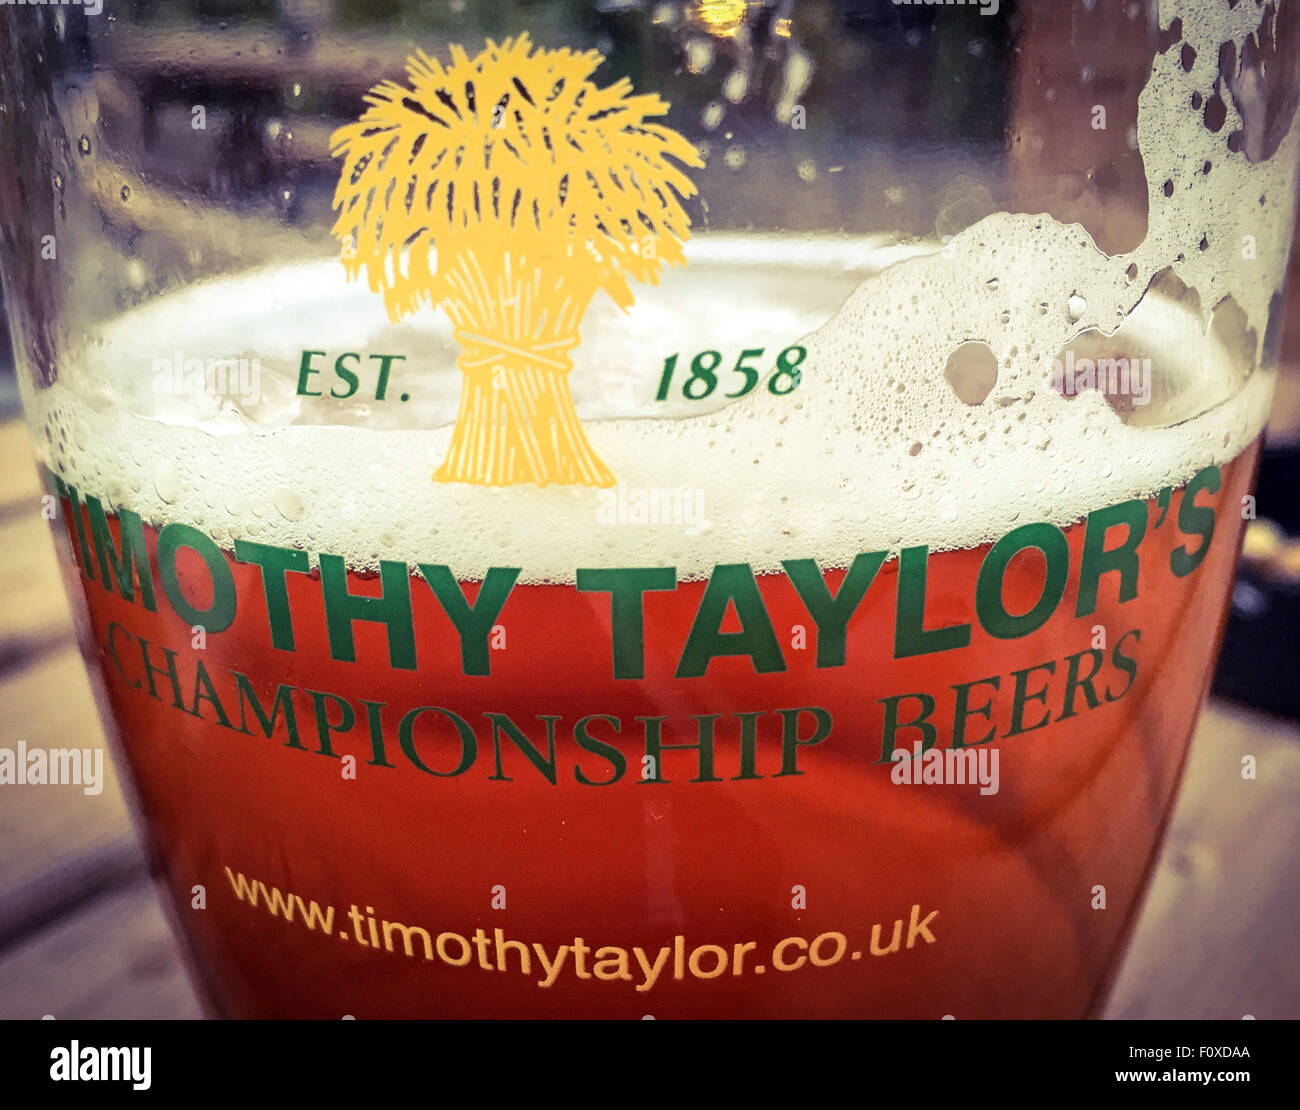 TT Timothy Taylor Championship Beers glass & ale, Yorkshire, England, UK - Est 1858 Stock Photo